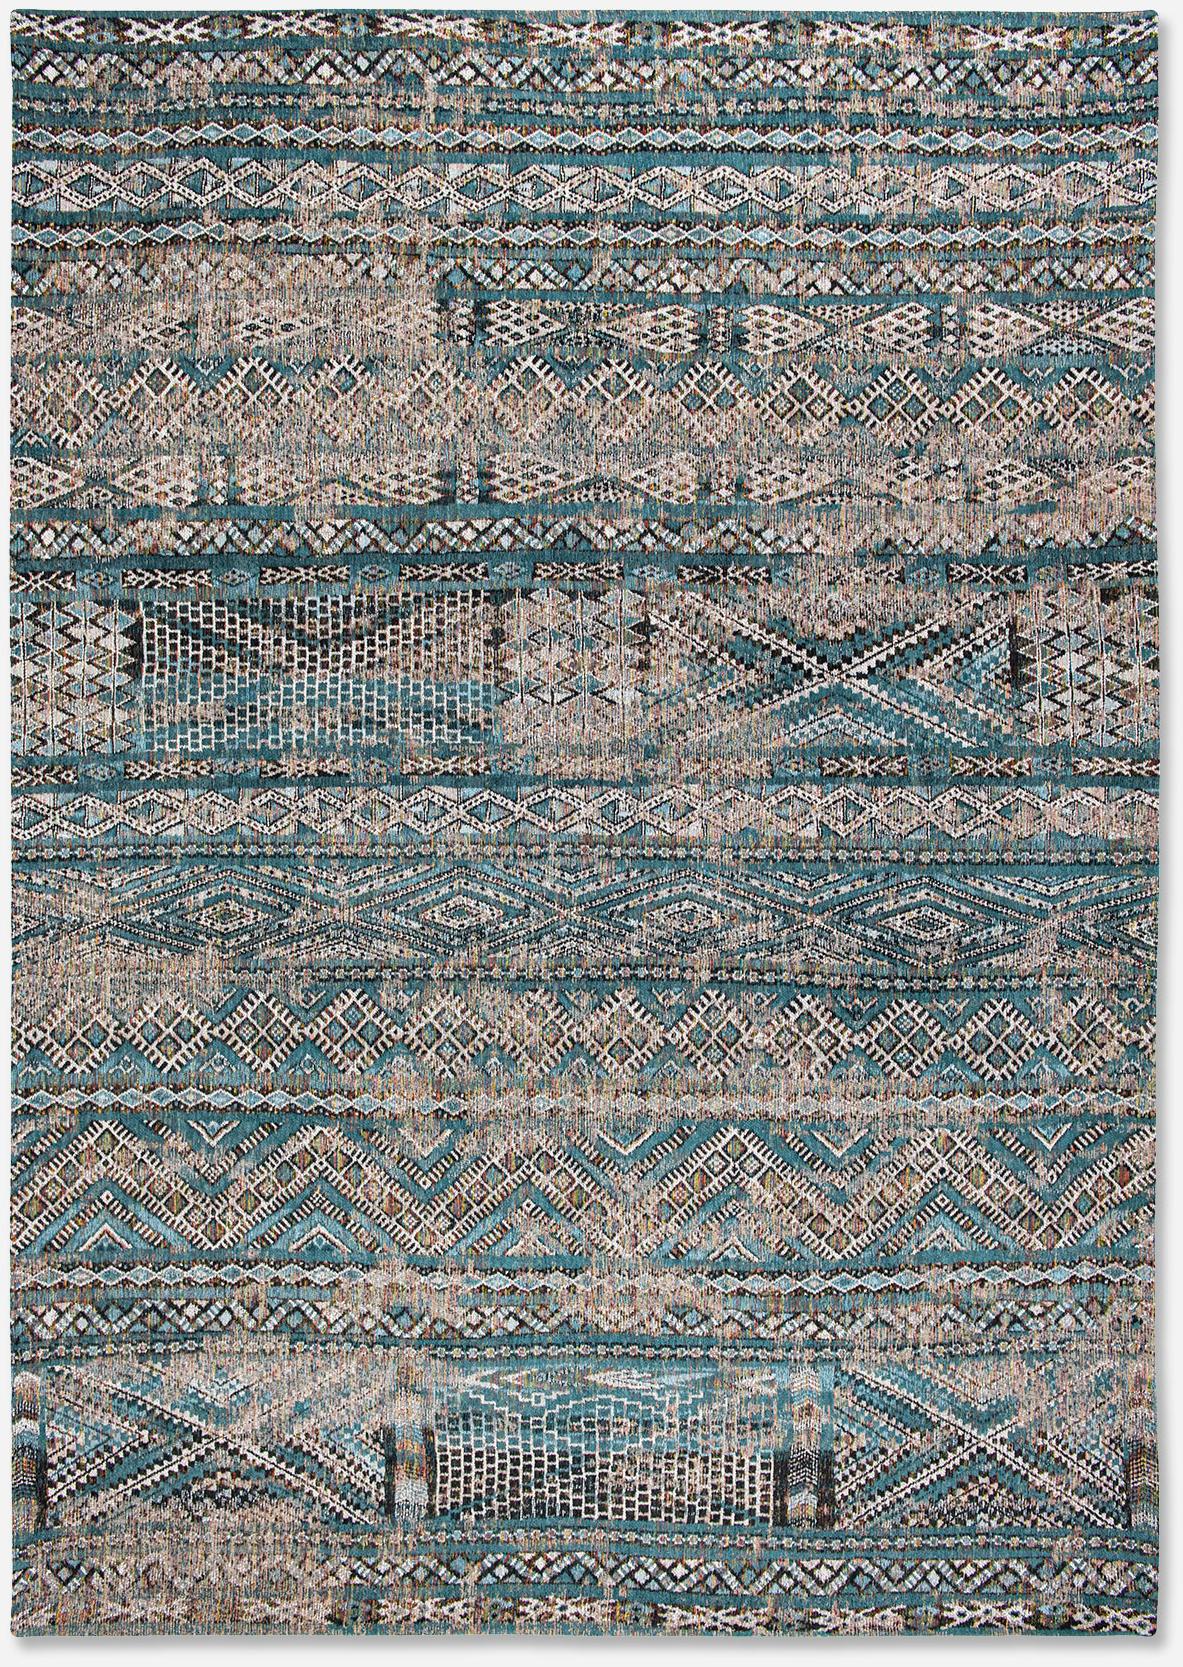 Antiquarian Flatwoven Rug ☞ Size: 8' x 11' 2" (240 x 340 cm)